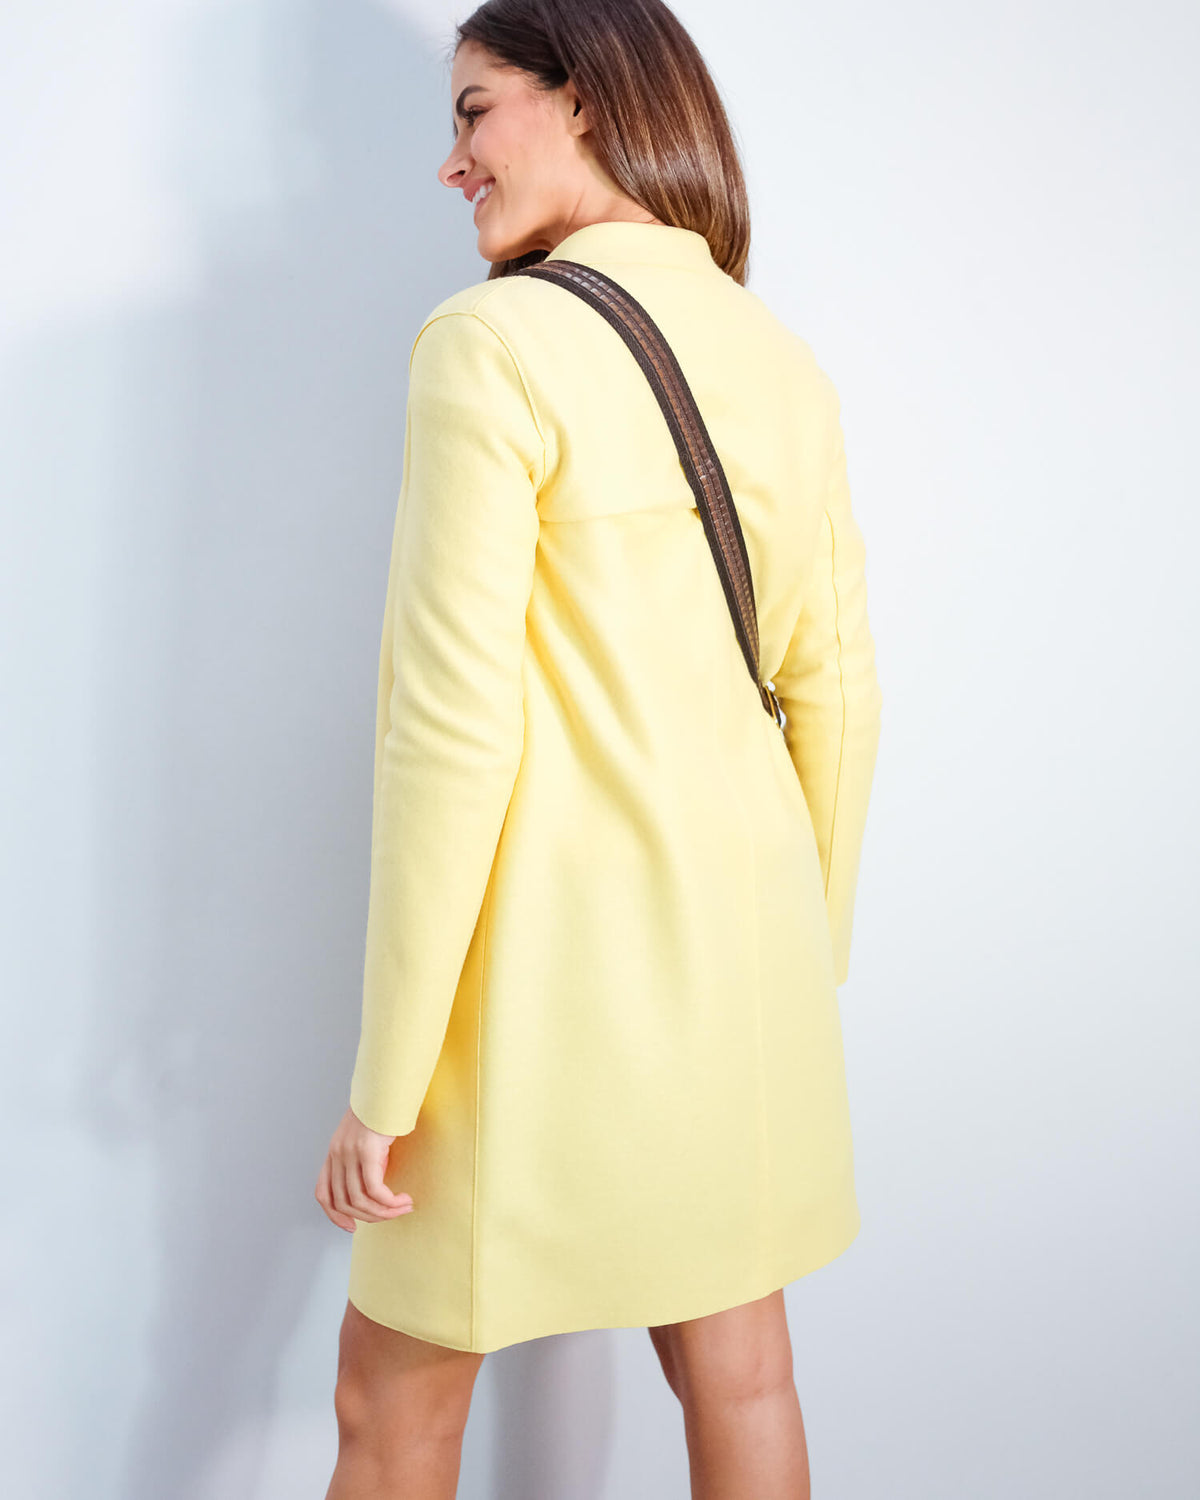 HWL Pressed wool boxy coat in pastel yellow